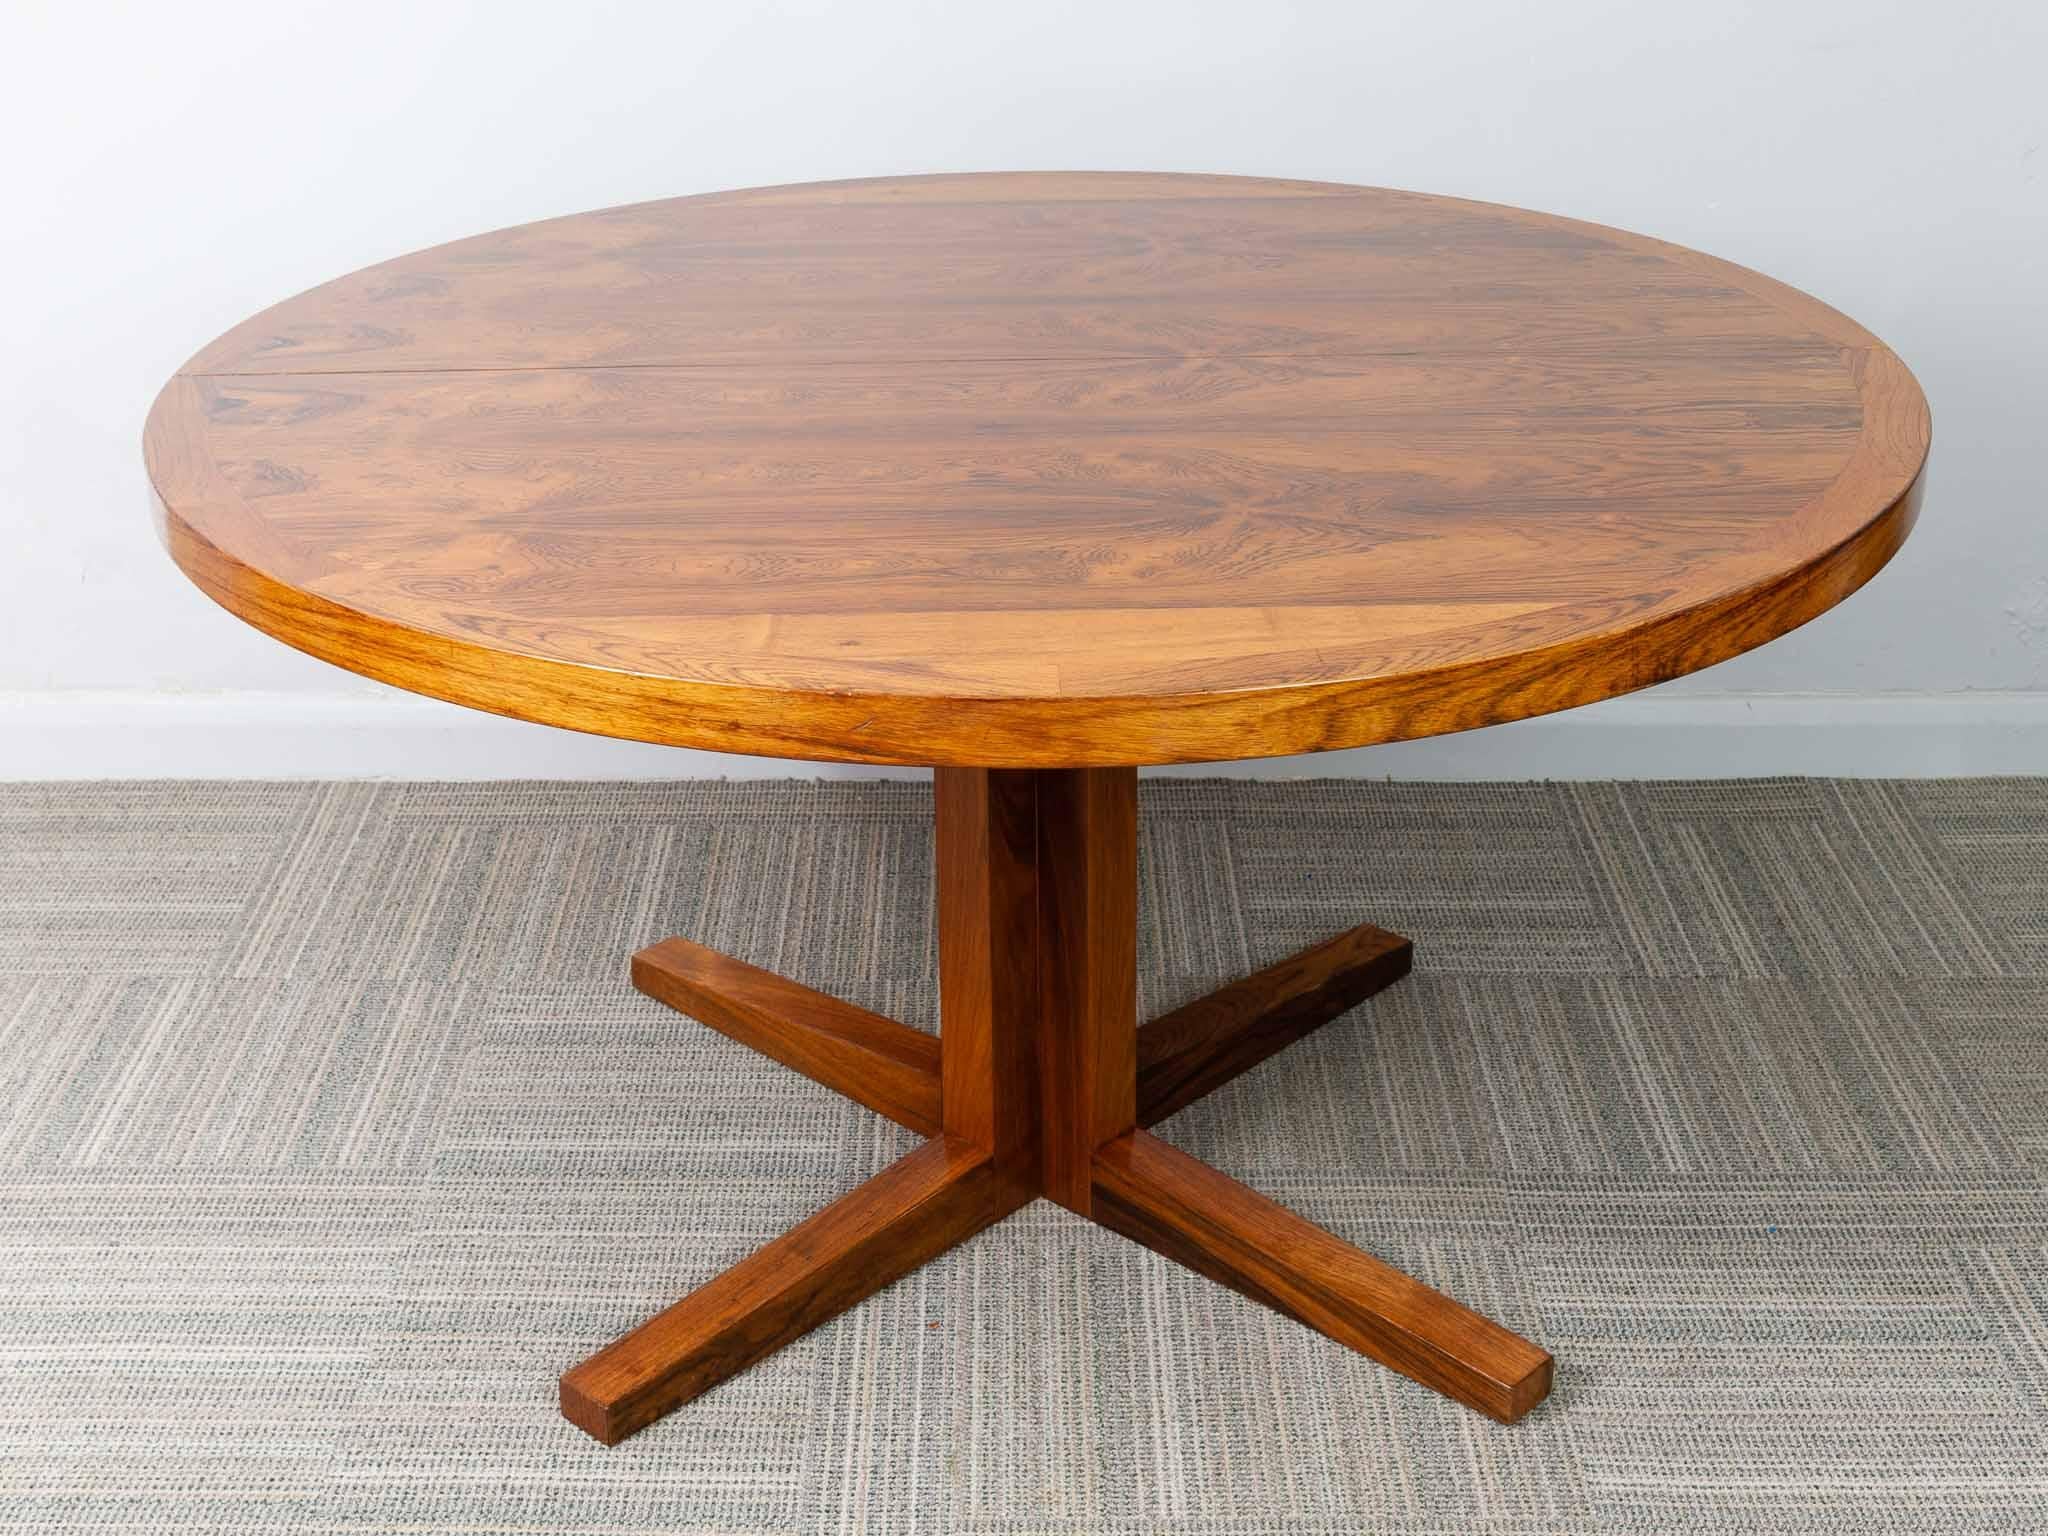 1960s Danish rosewood pedestal dining table designed by John Mortensen for Heltborg Mobler. The table sits on a central pedestal base with two independent extension leaves which require storing, if not in use. The table extends from 180 cm to 230 cm